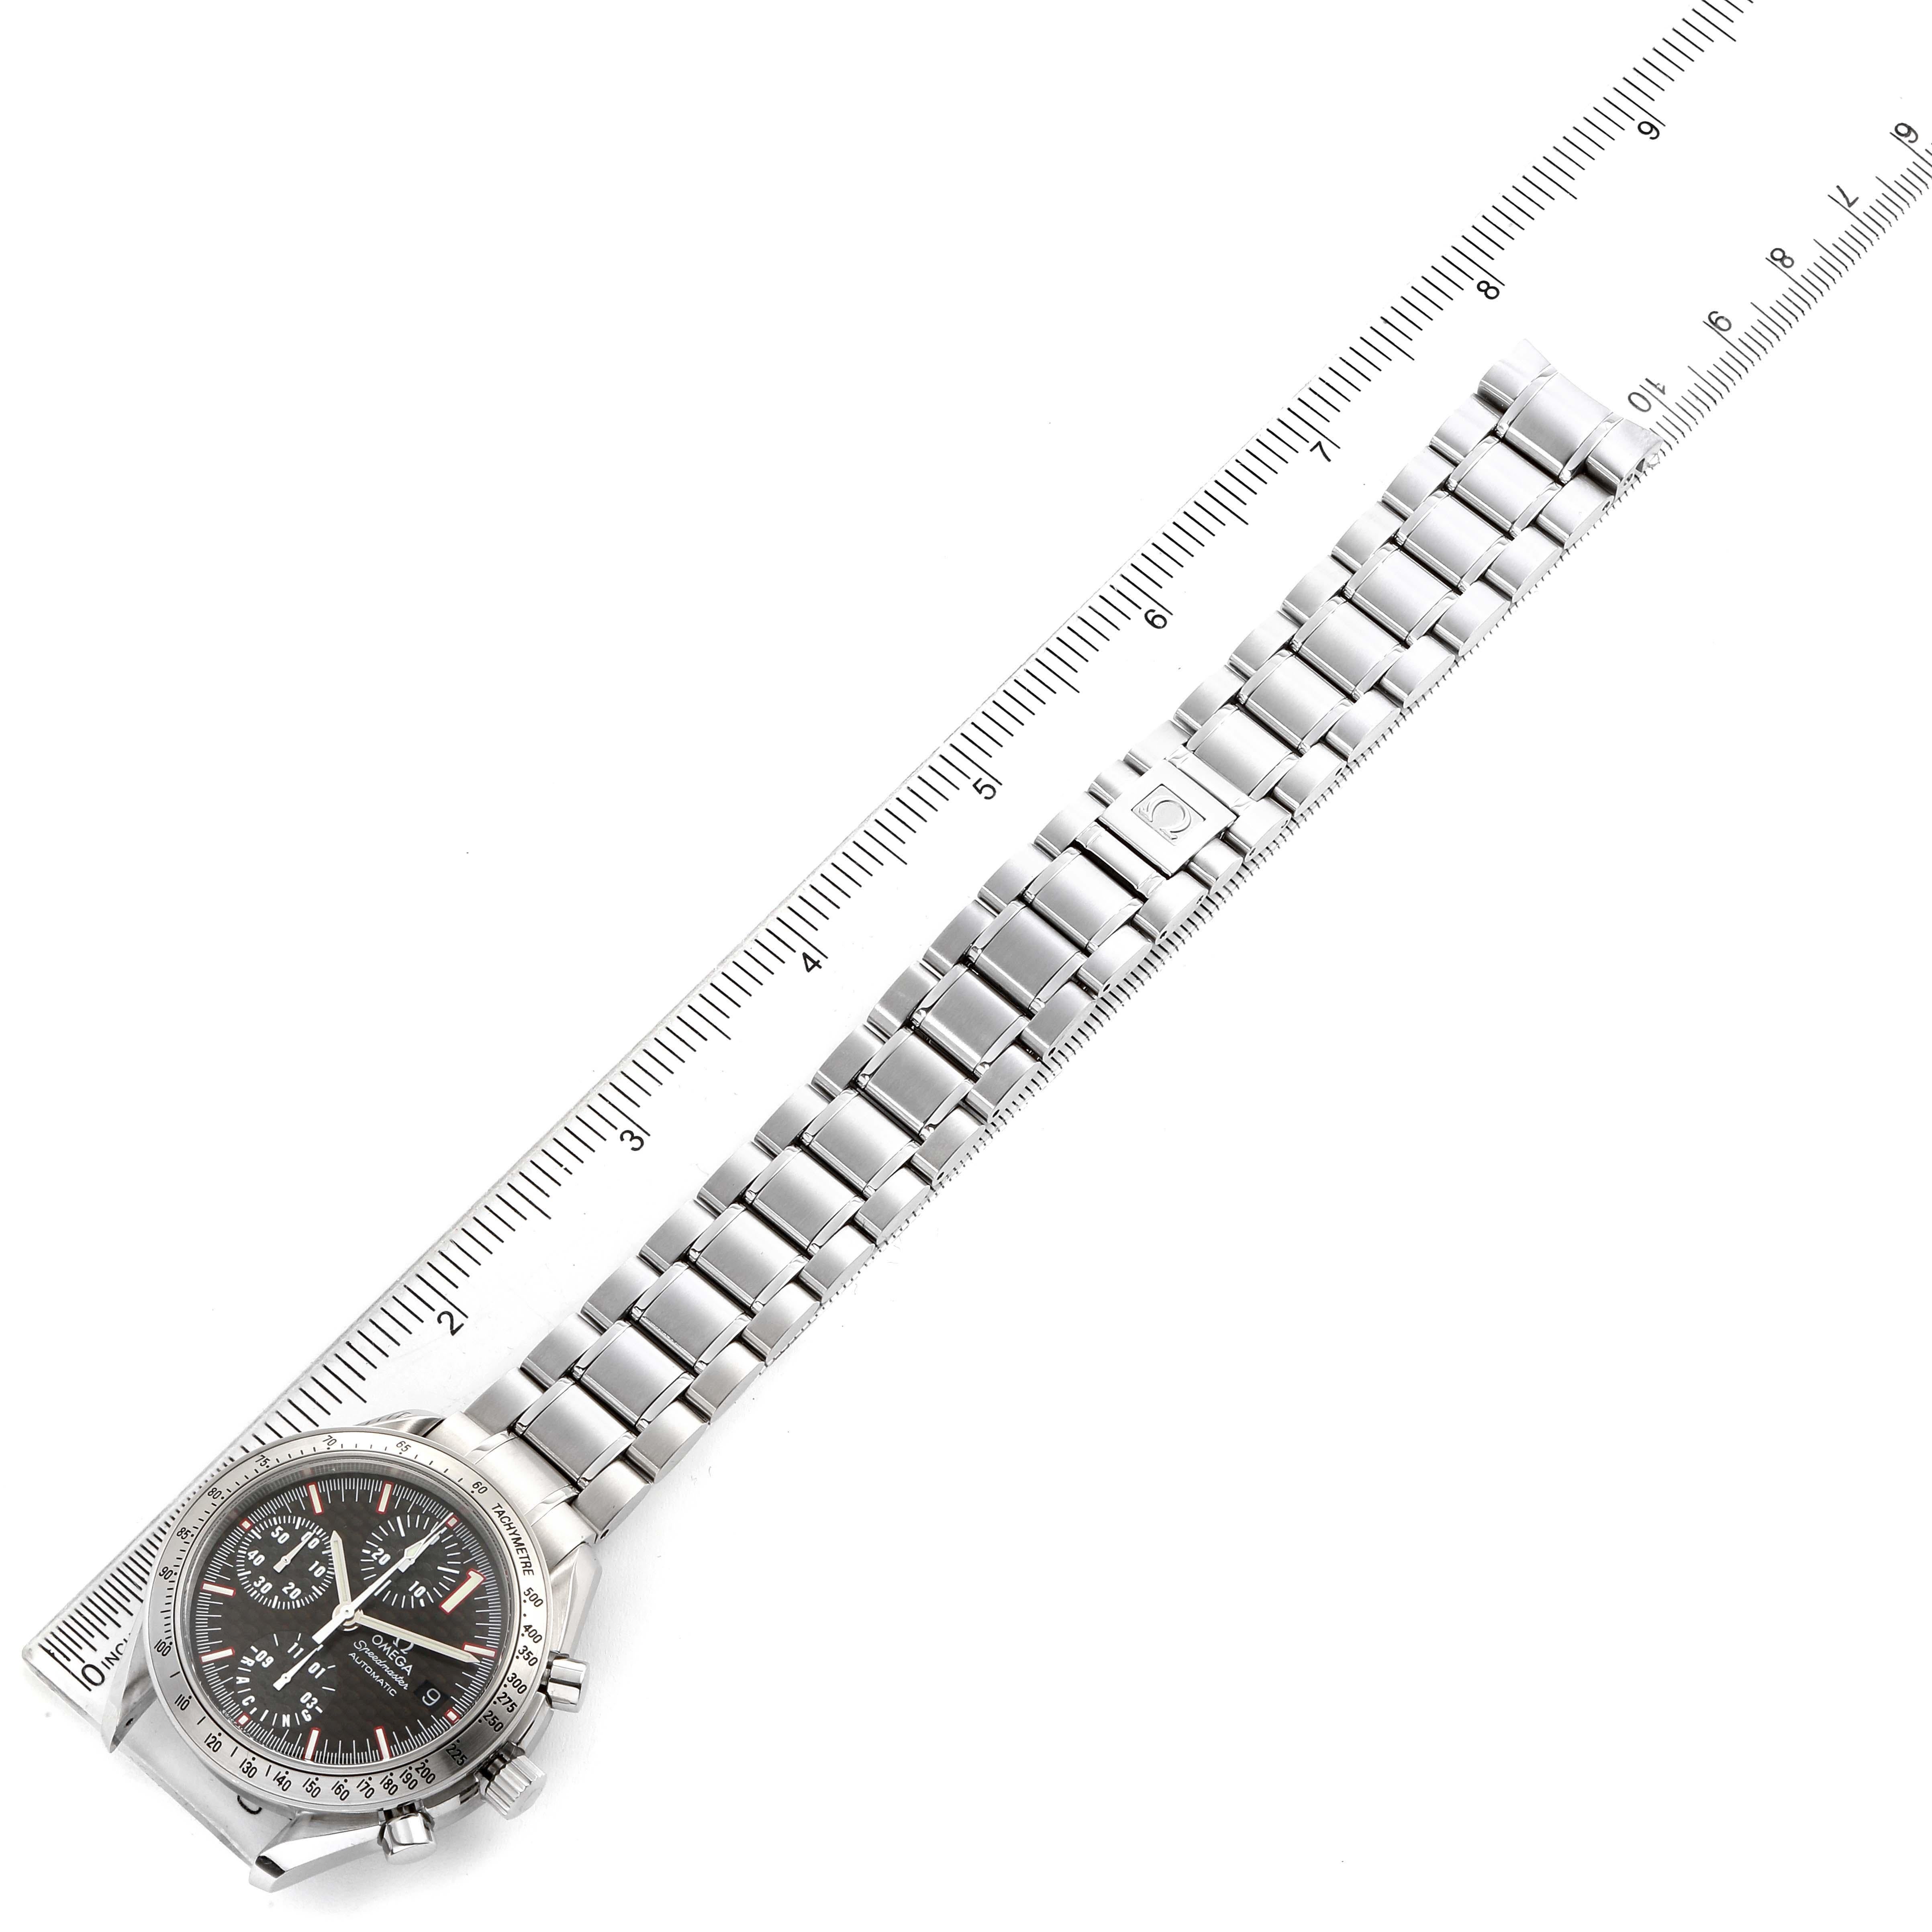 Omega Speedmaster Schumacher Racing Limited Edition Watch 3519.50.00 For Sale 2